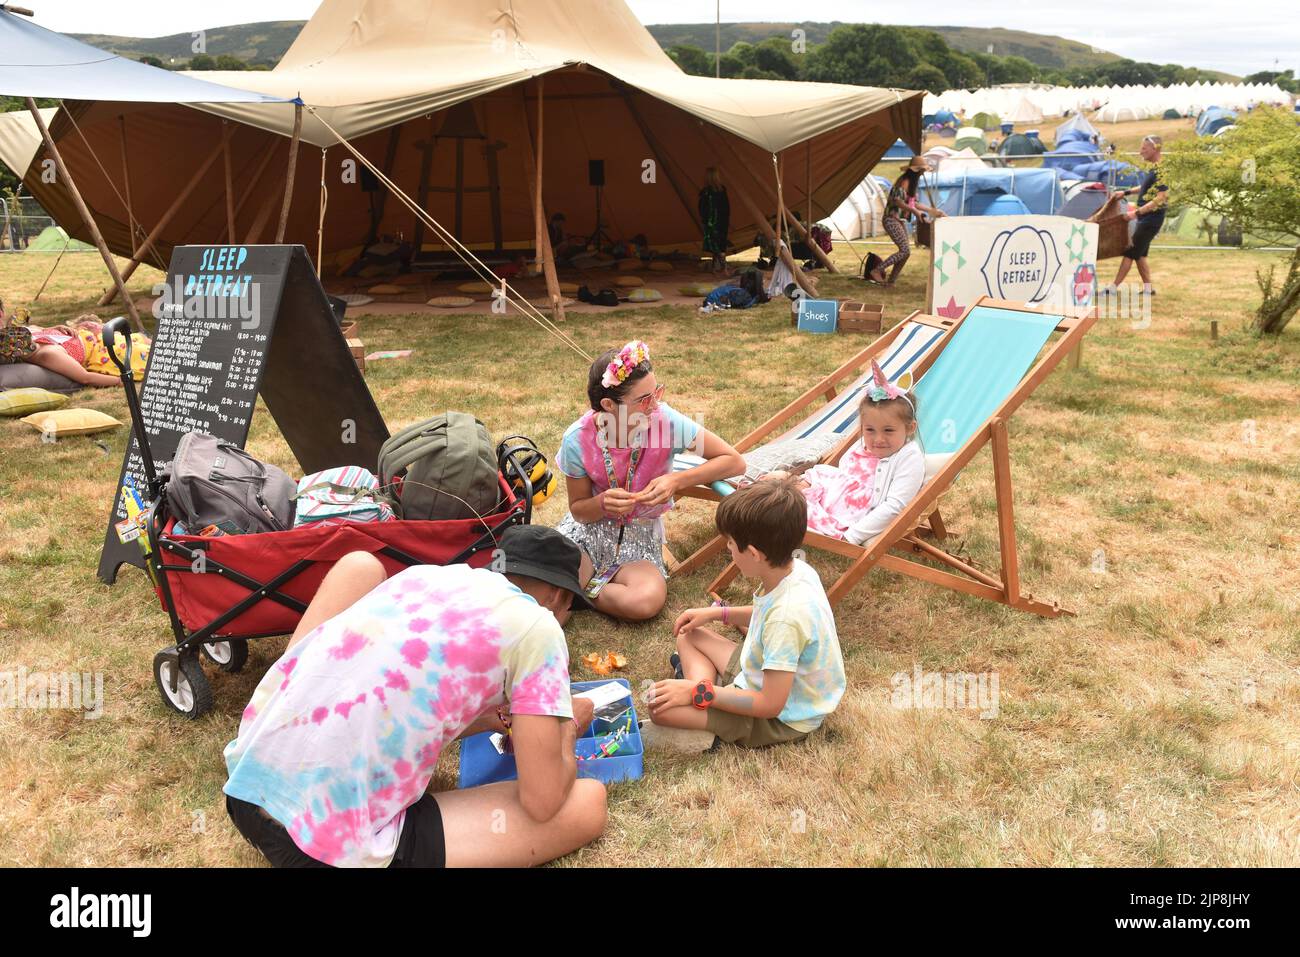 Family in the Slow Motion area @ Camp Bestival, Lulworth Castle and Estate, Dorset UK July 28 - 31 2022 Stock Photo